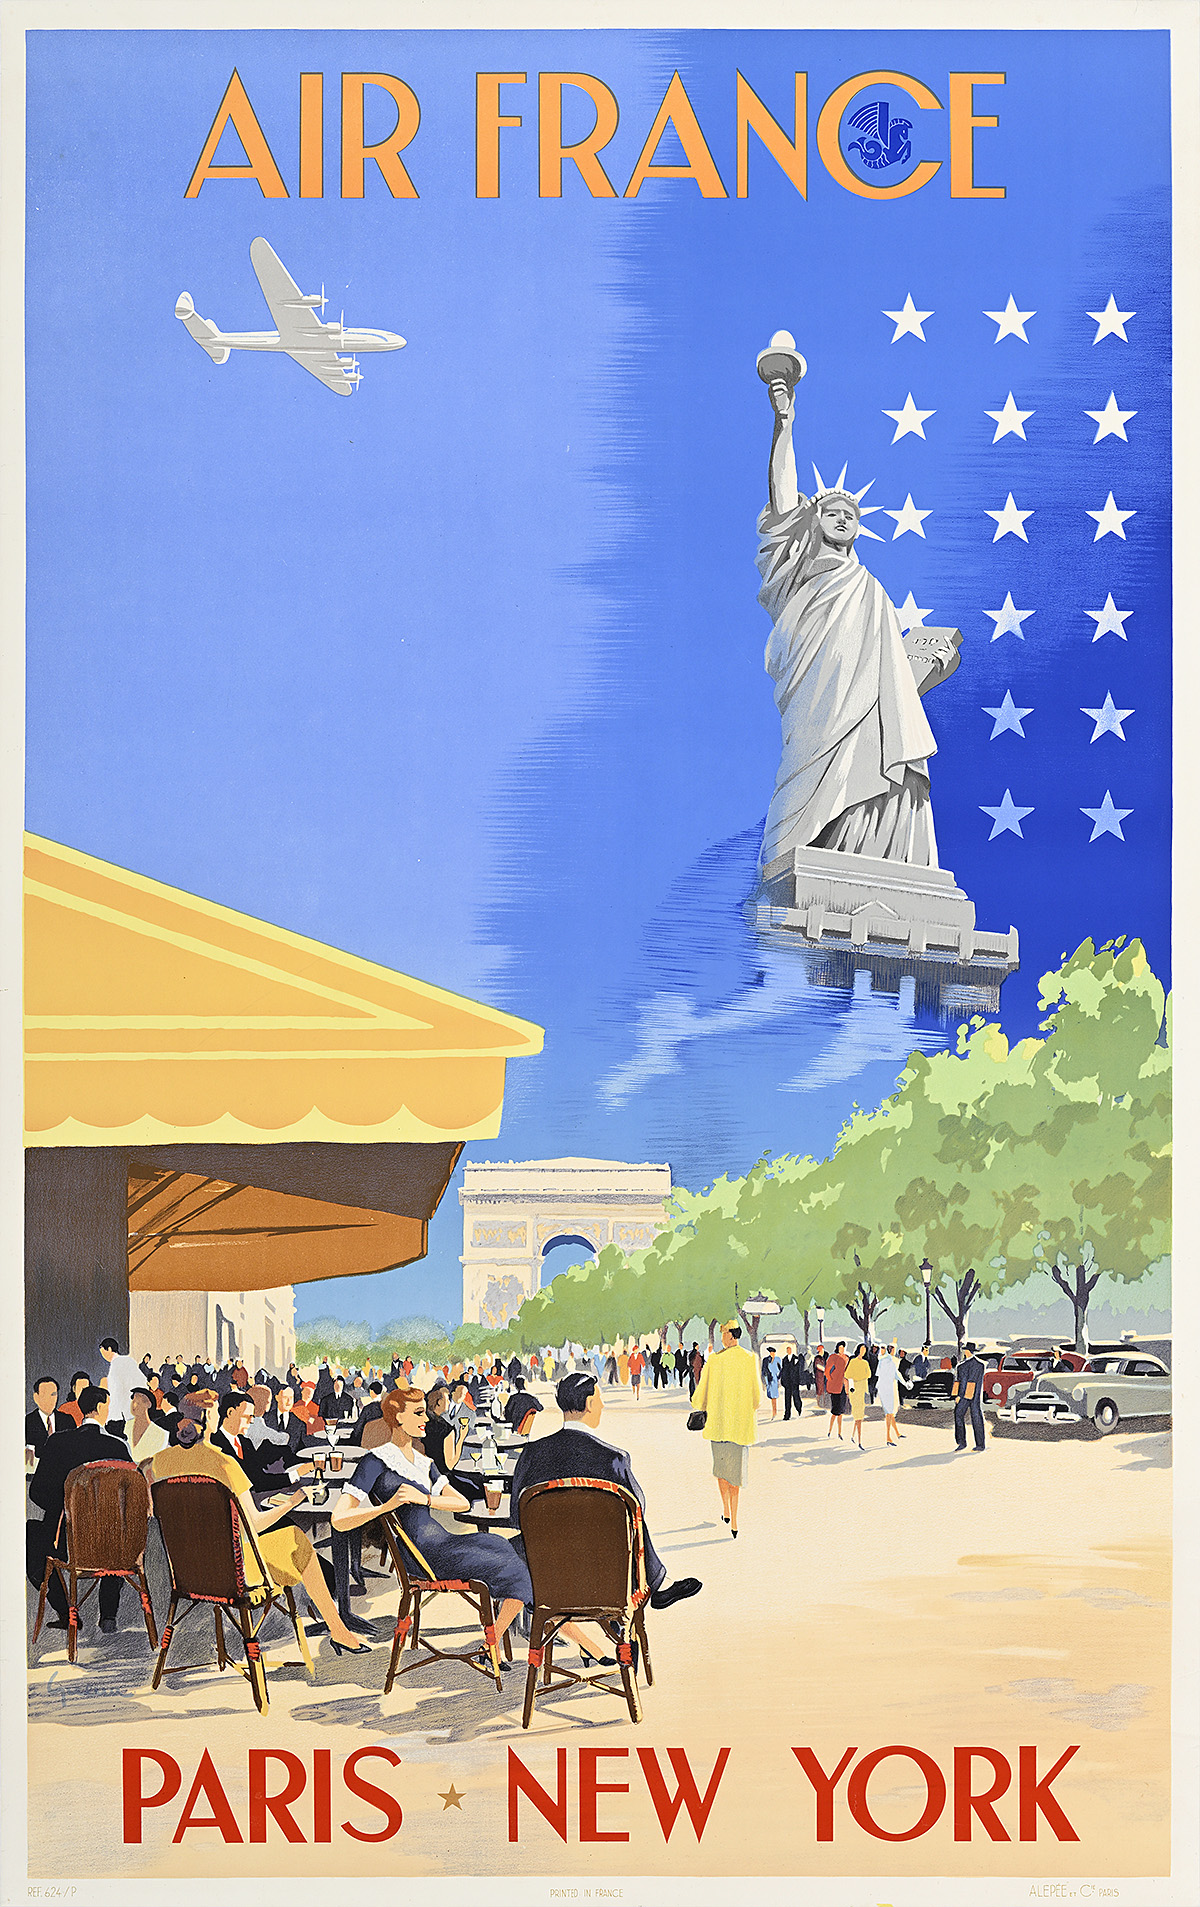 A poster of Parisian cafe dwellers looking up at a plane flying towards the Statue of Liberty.